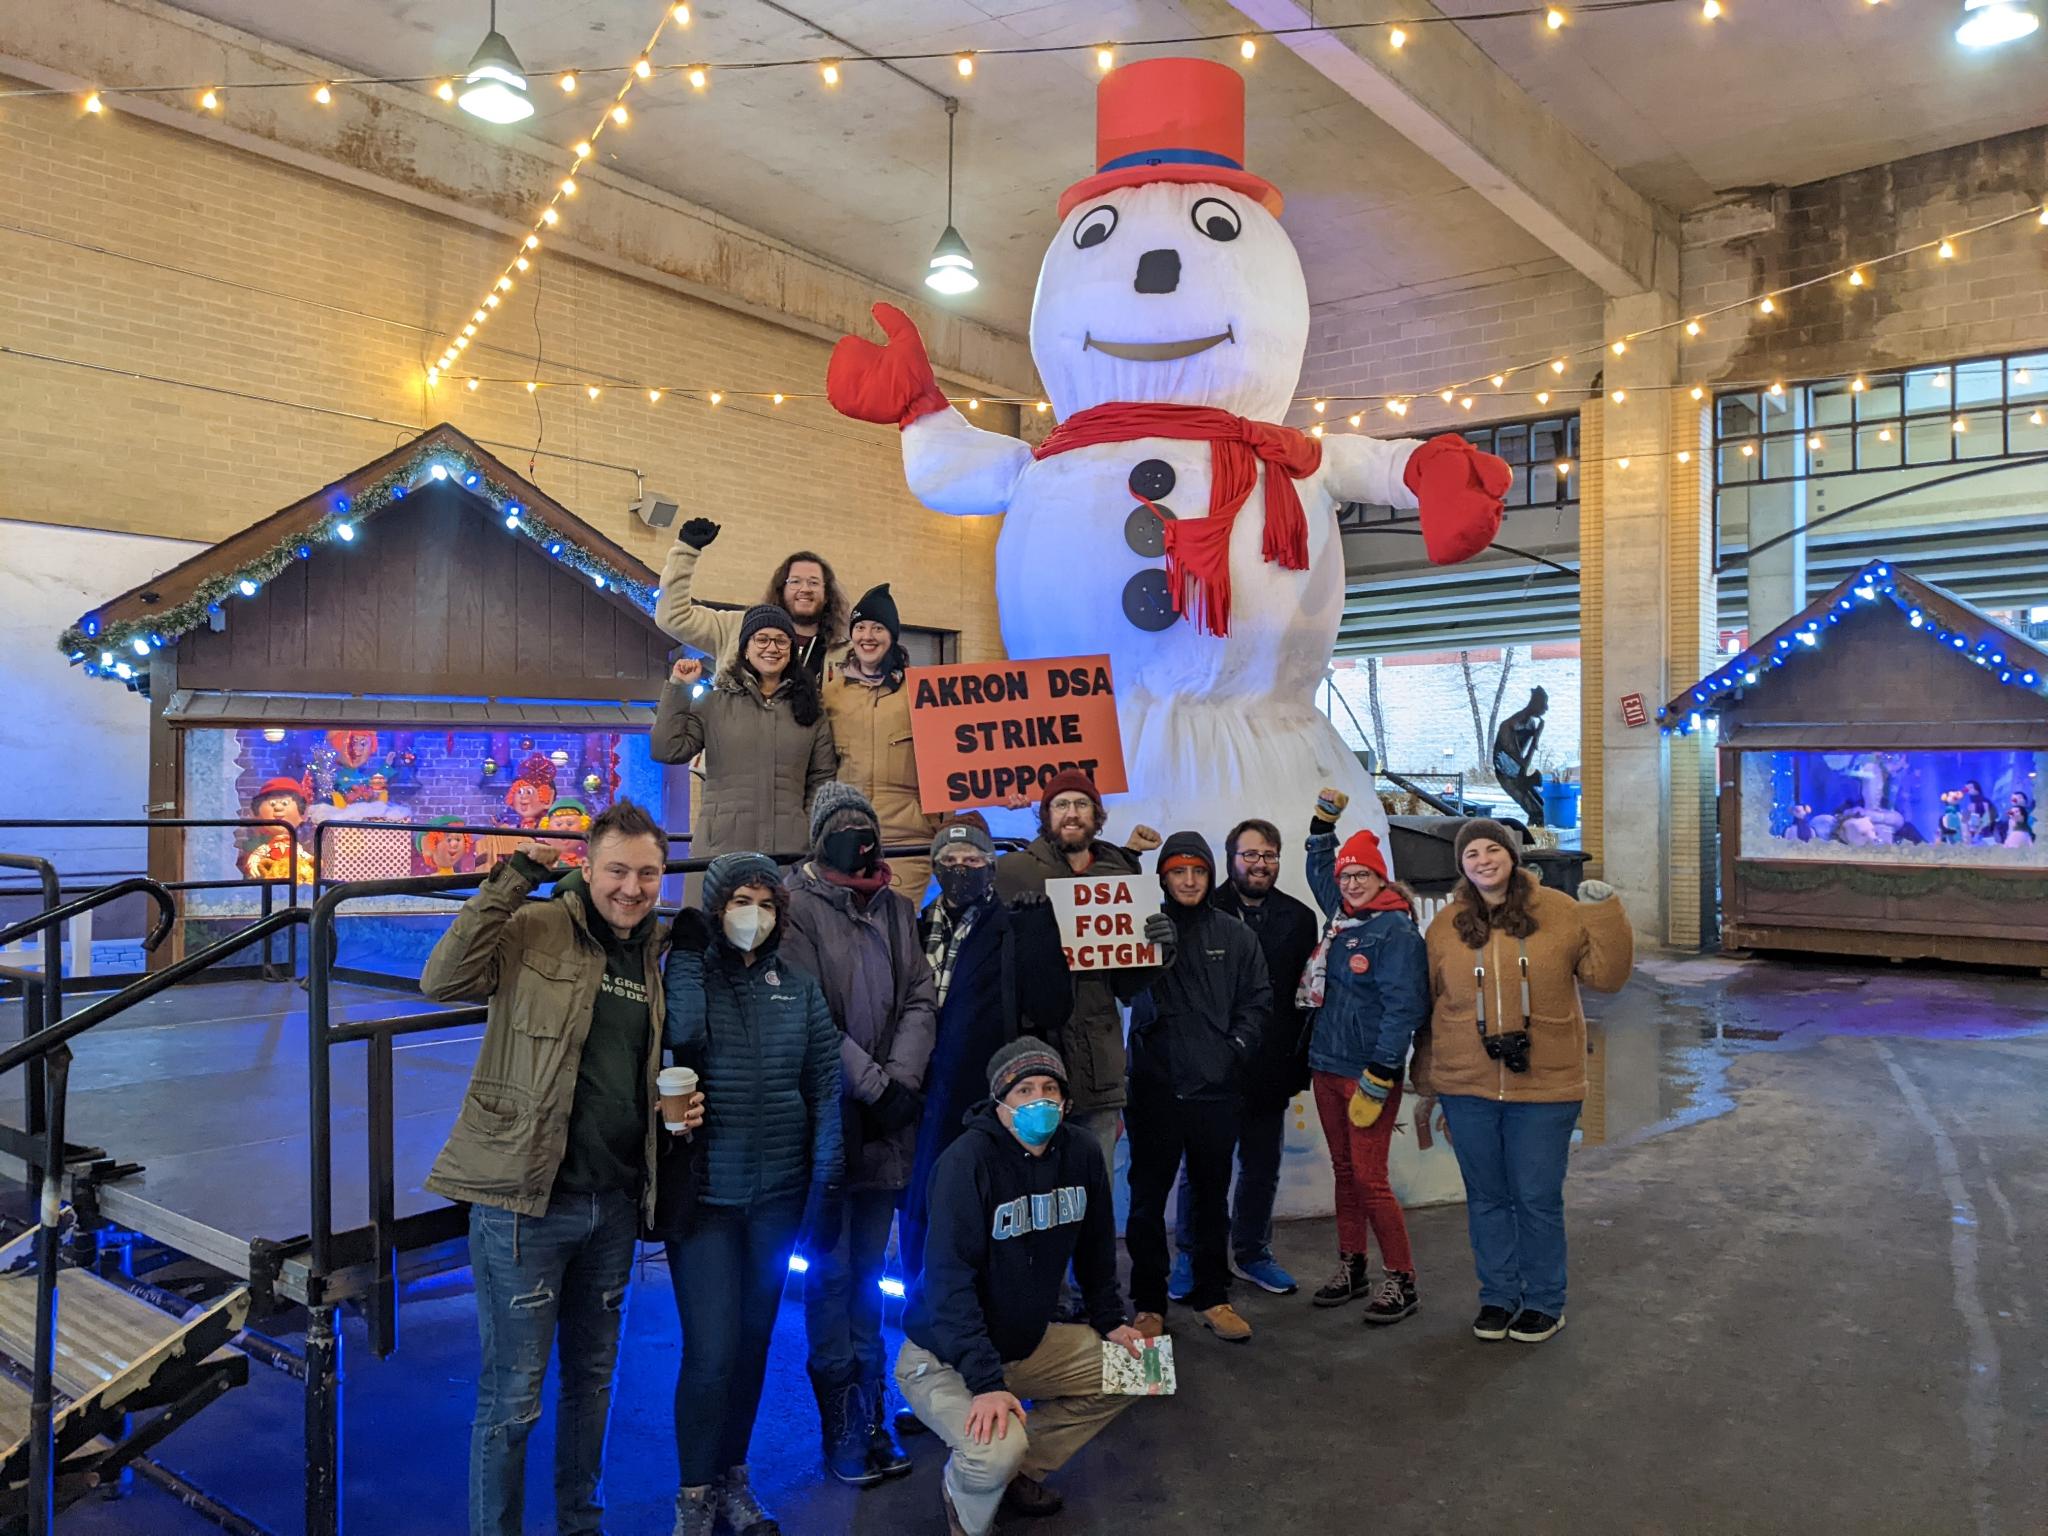 Akron DSA gathered around Archie the Snowman with a sign of strike solidarity.